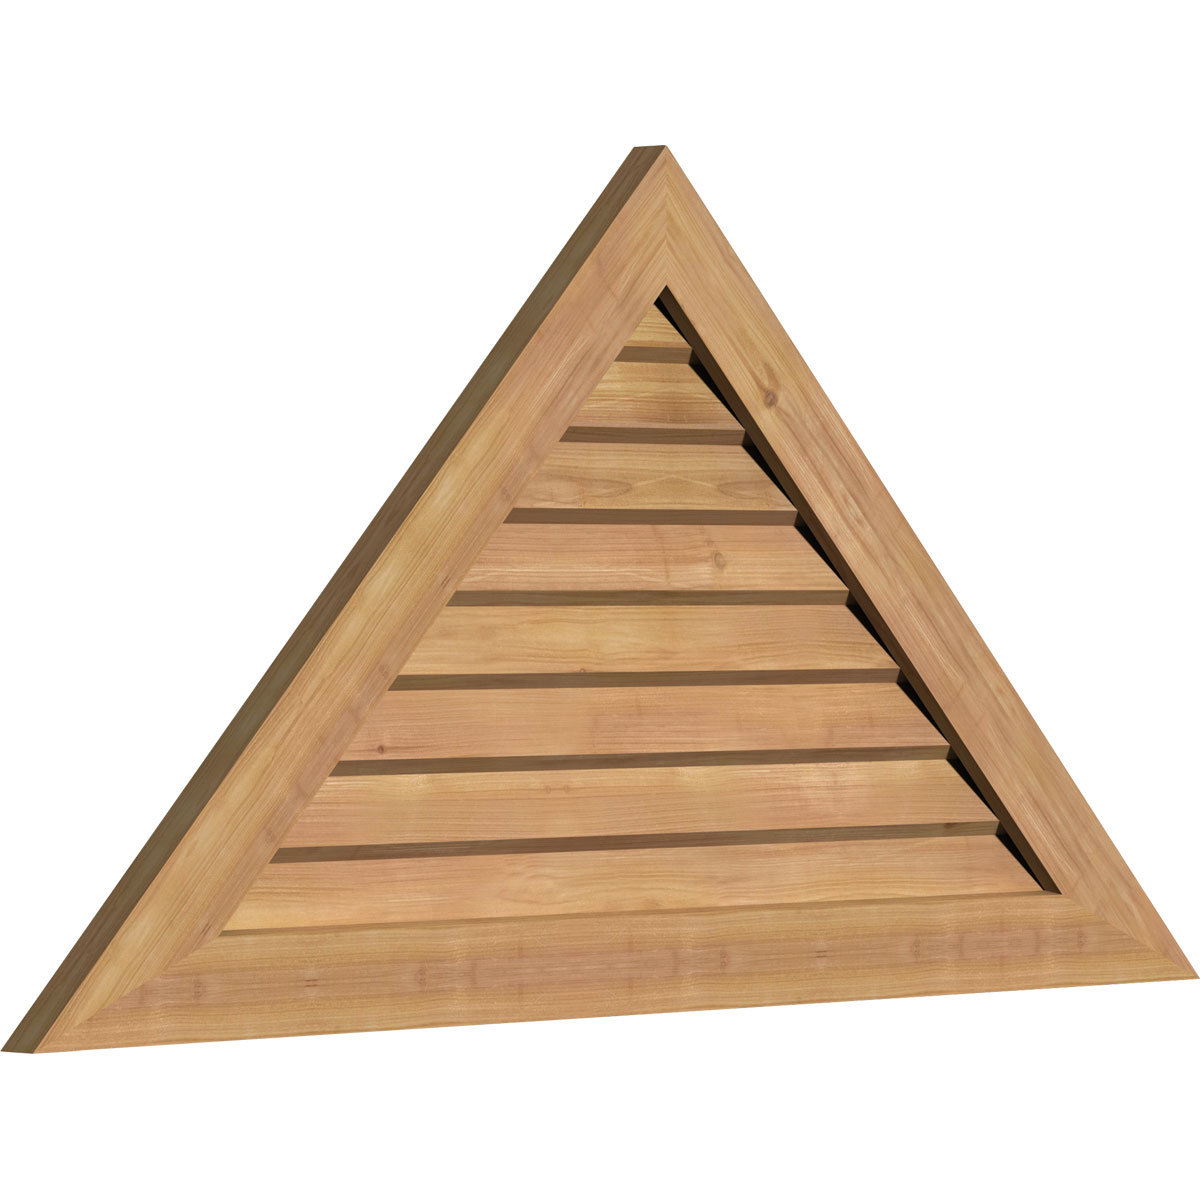 84"W X 38 1/2"H Triangle Gable Vent (96 7/8"W X 44 3/8"H Frame Size) 11/12 Pitch: Unfinished, Non-Functional, Smooth Western Red Cedar Gable Vent W/ Decorative Face Frame - image 2 of 12